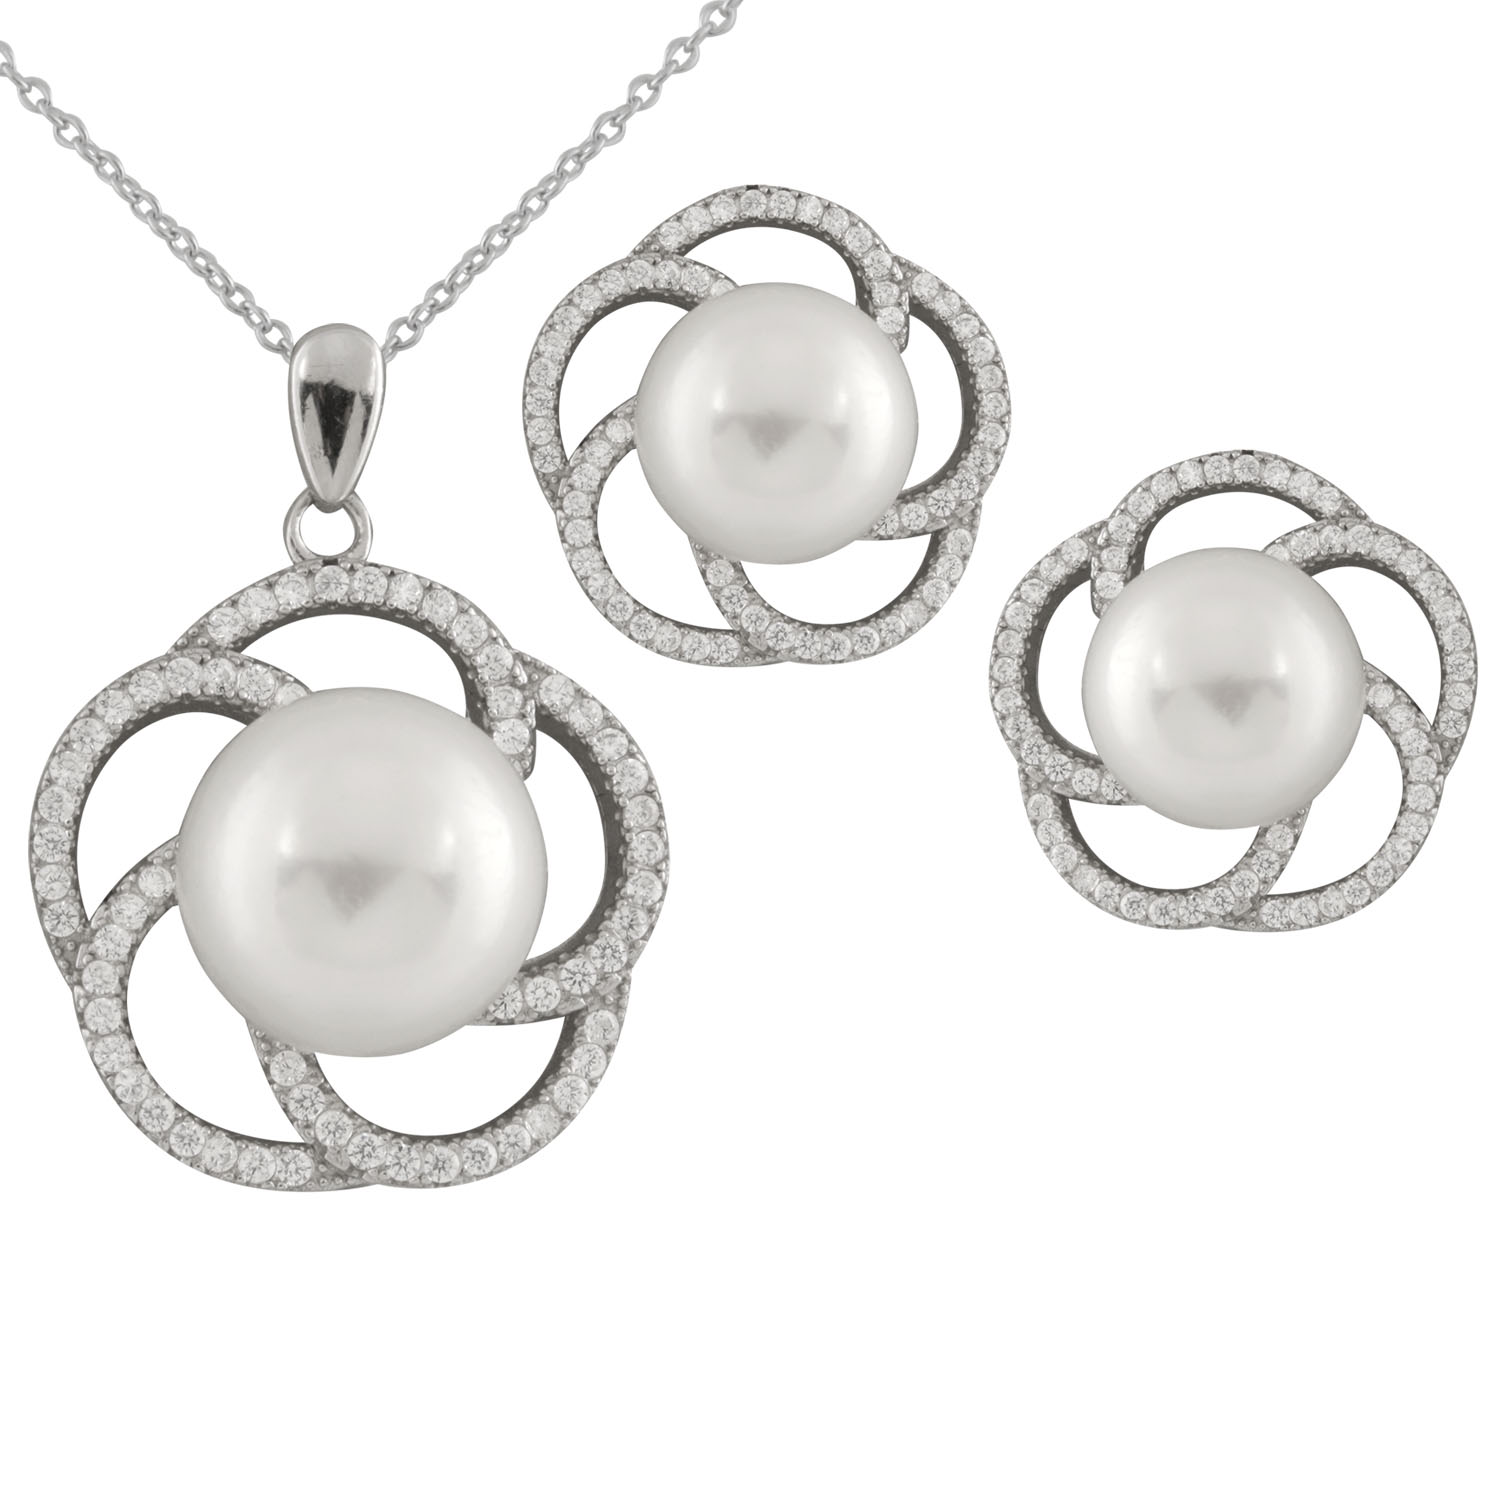 New sterling silver set